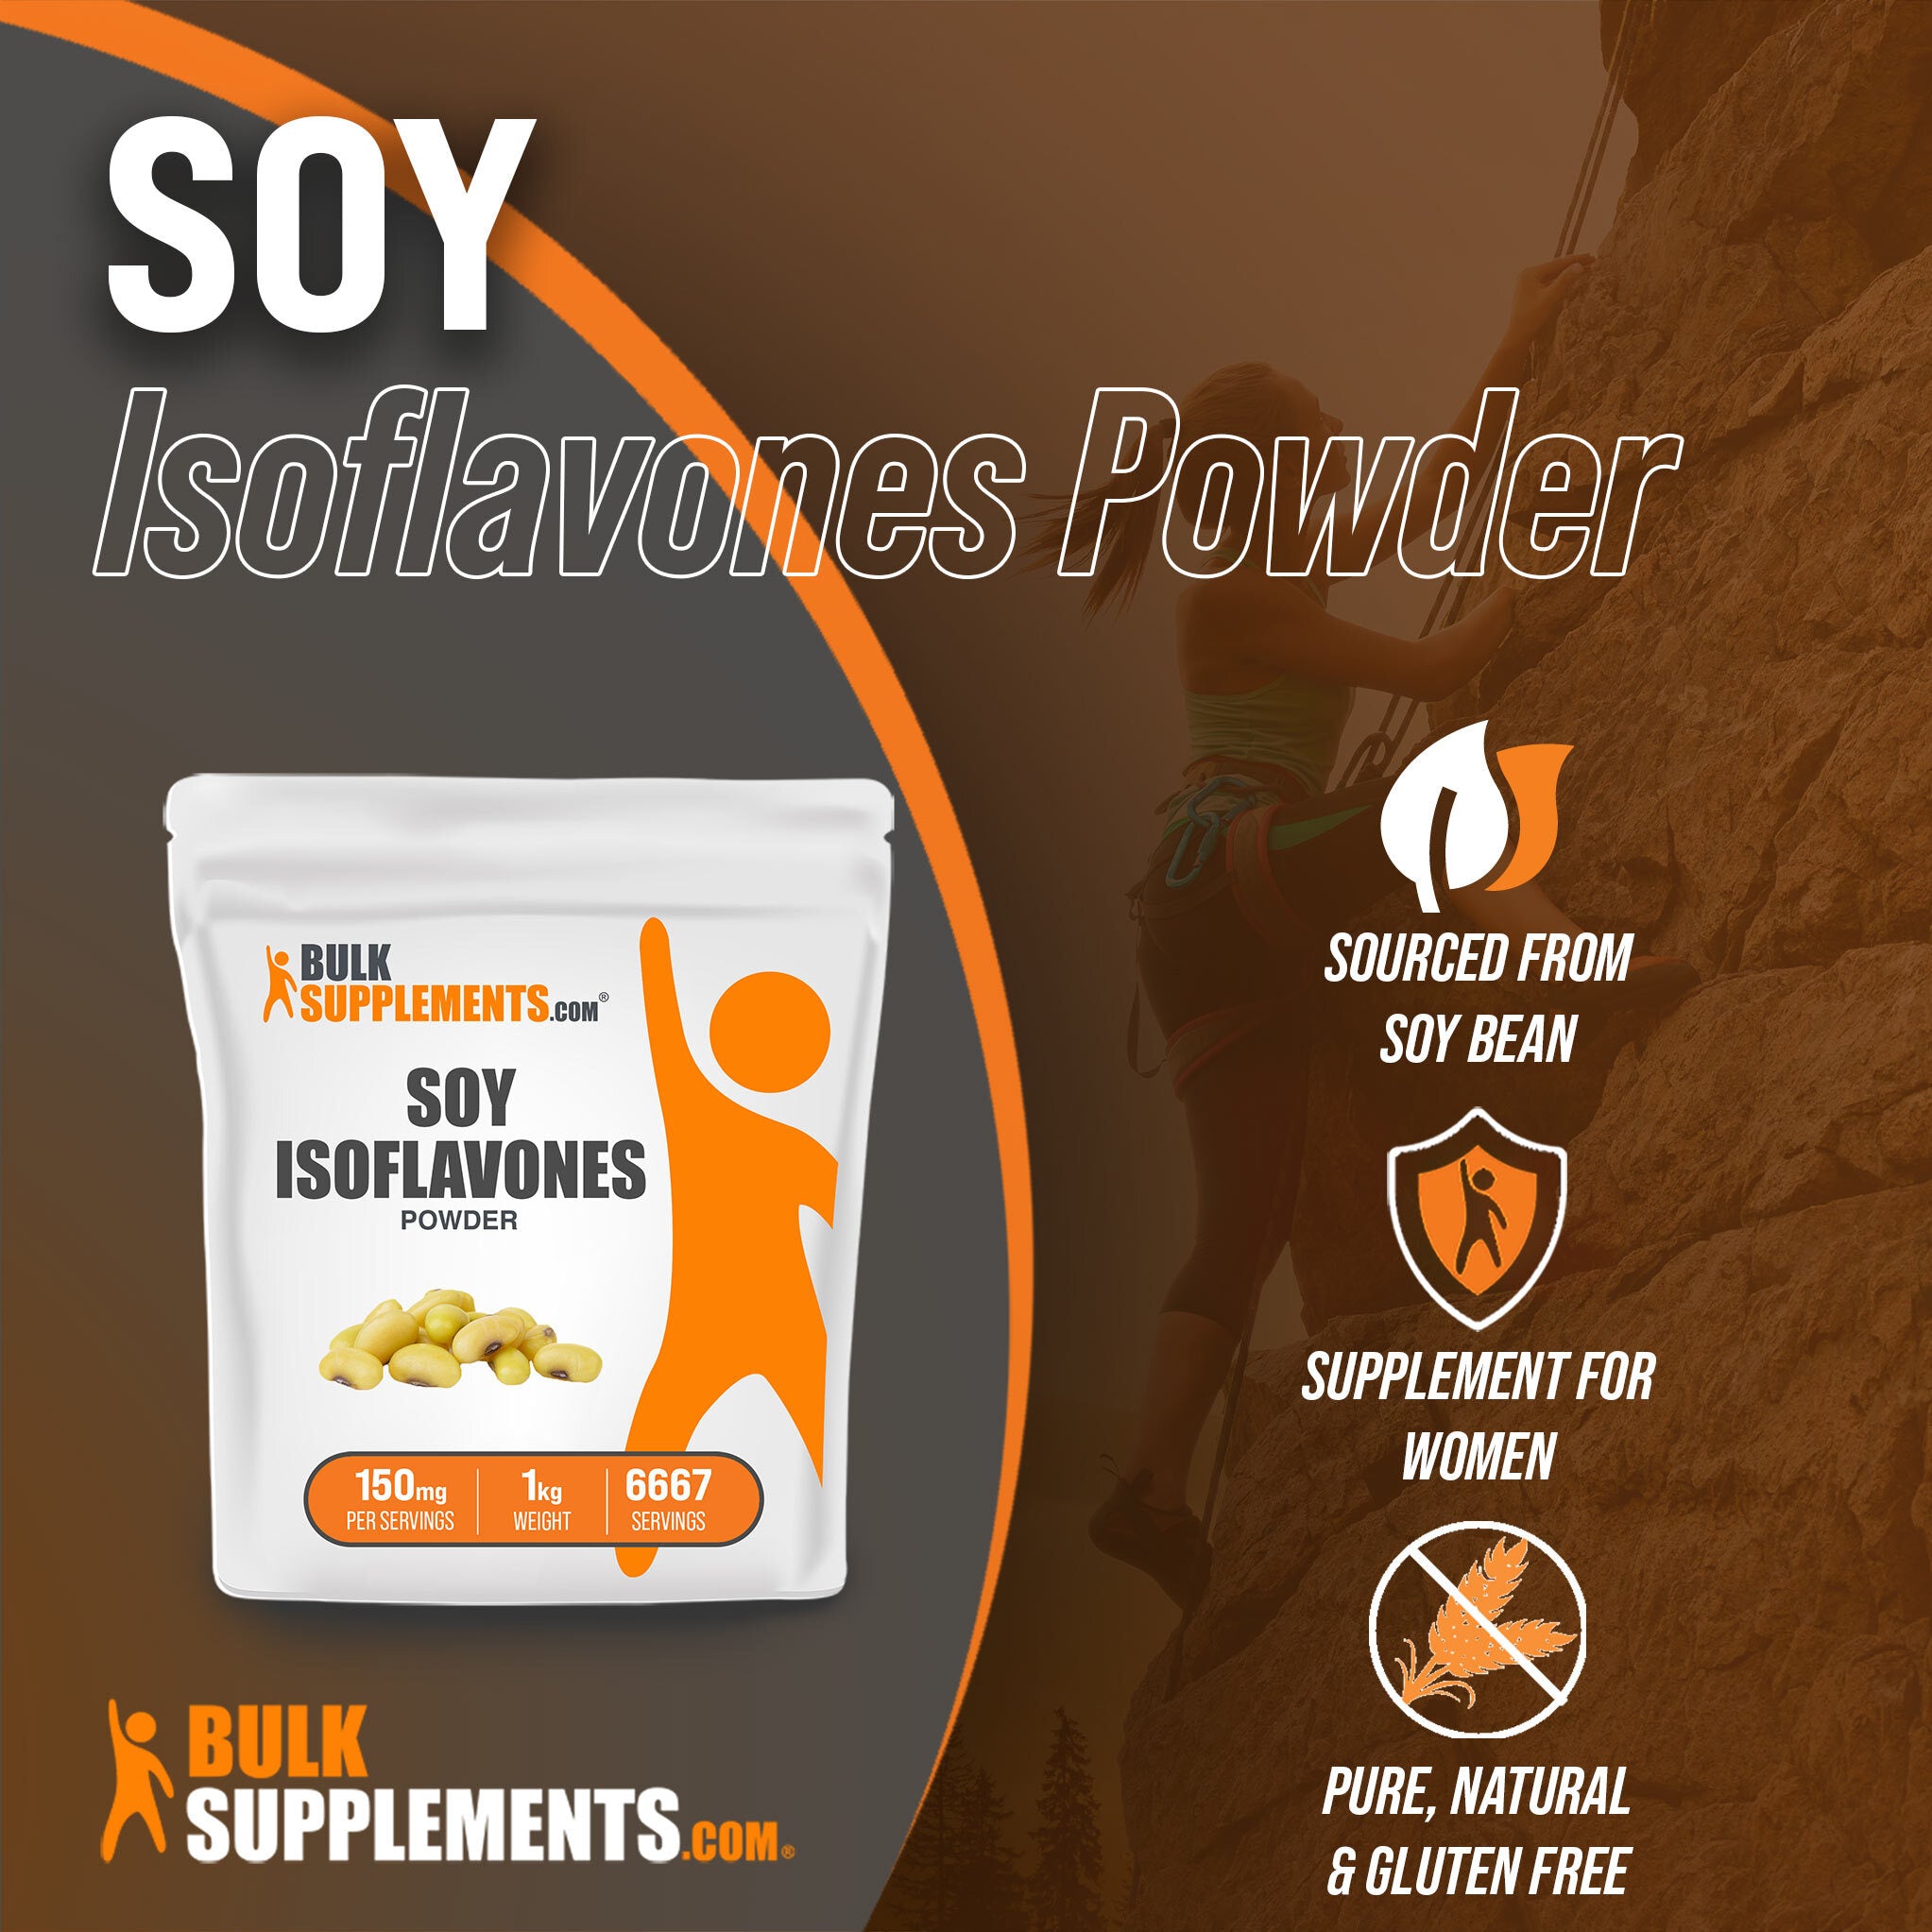 Benefits of Soy Isoflavones Powder: sourced for soy bean, supplement for women, pure, natural and gluten free